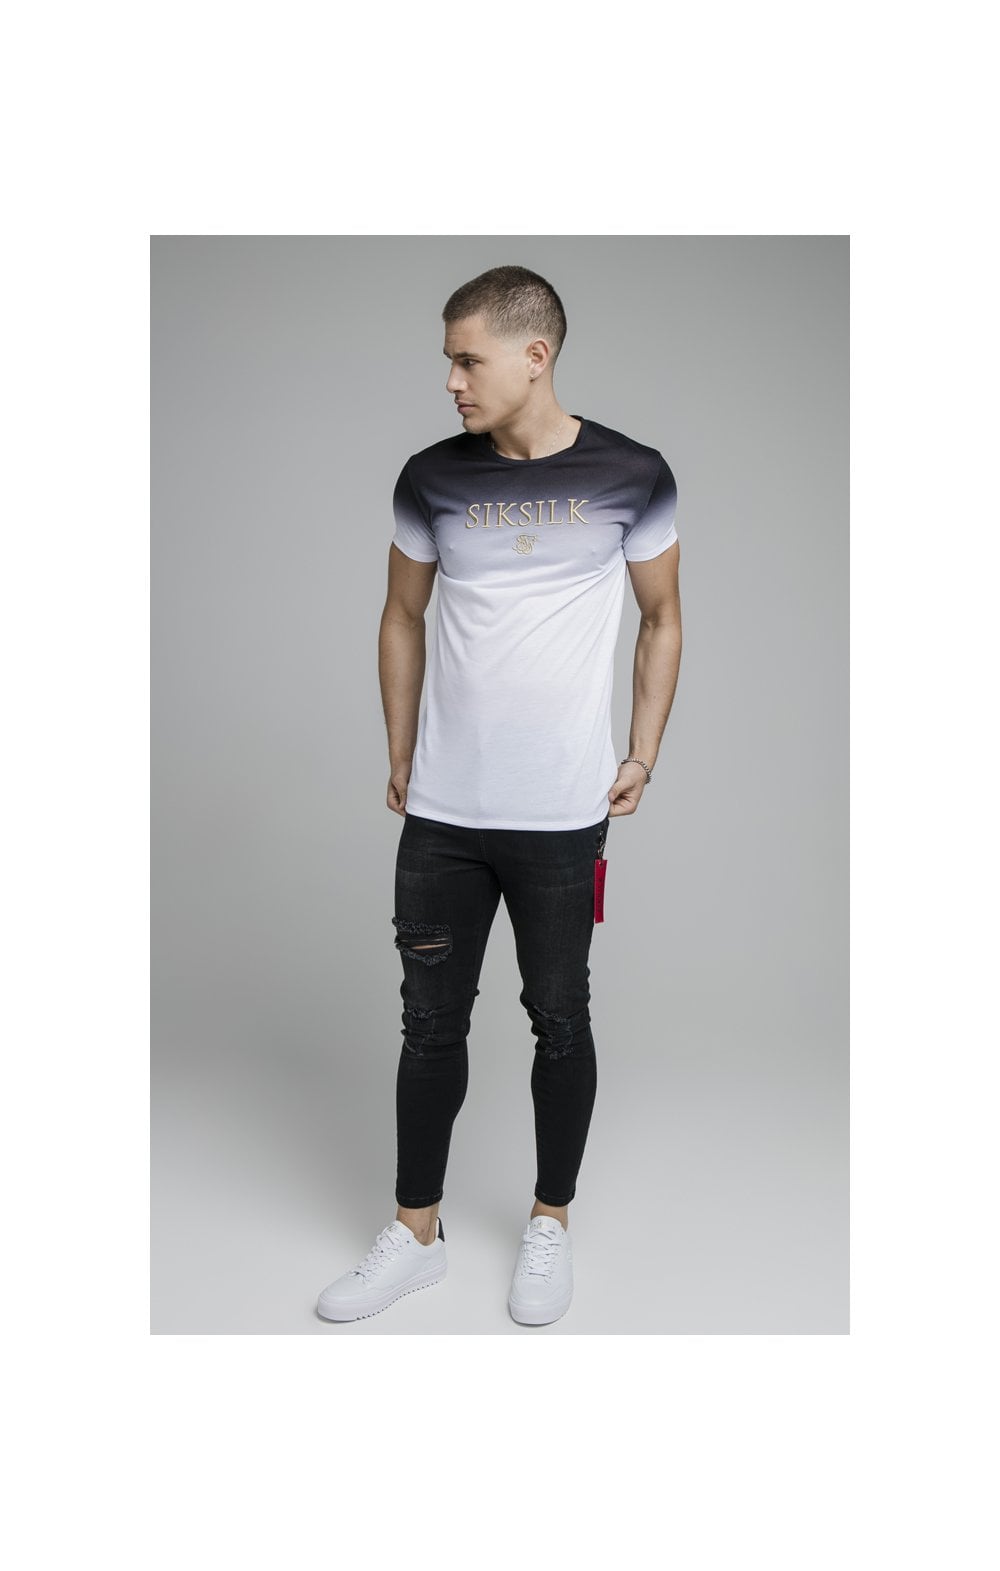 Black Embroidered Muscle Fit T-Shirt (3)